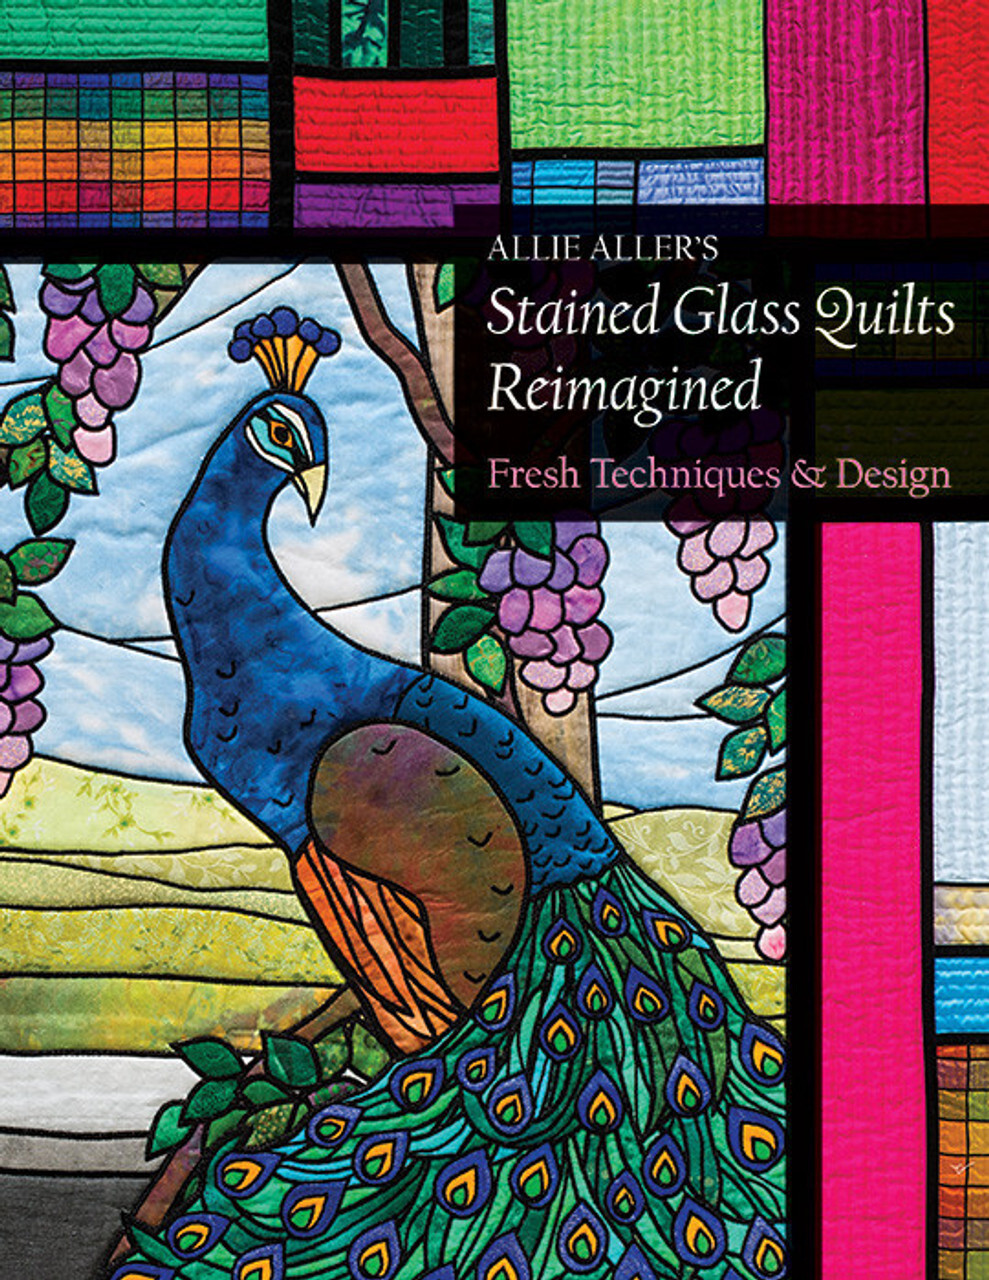 ct-publishing-allie-allers-stained-glass-quilts-reimagined__35046